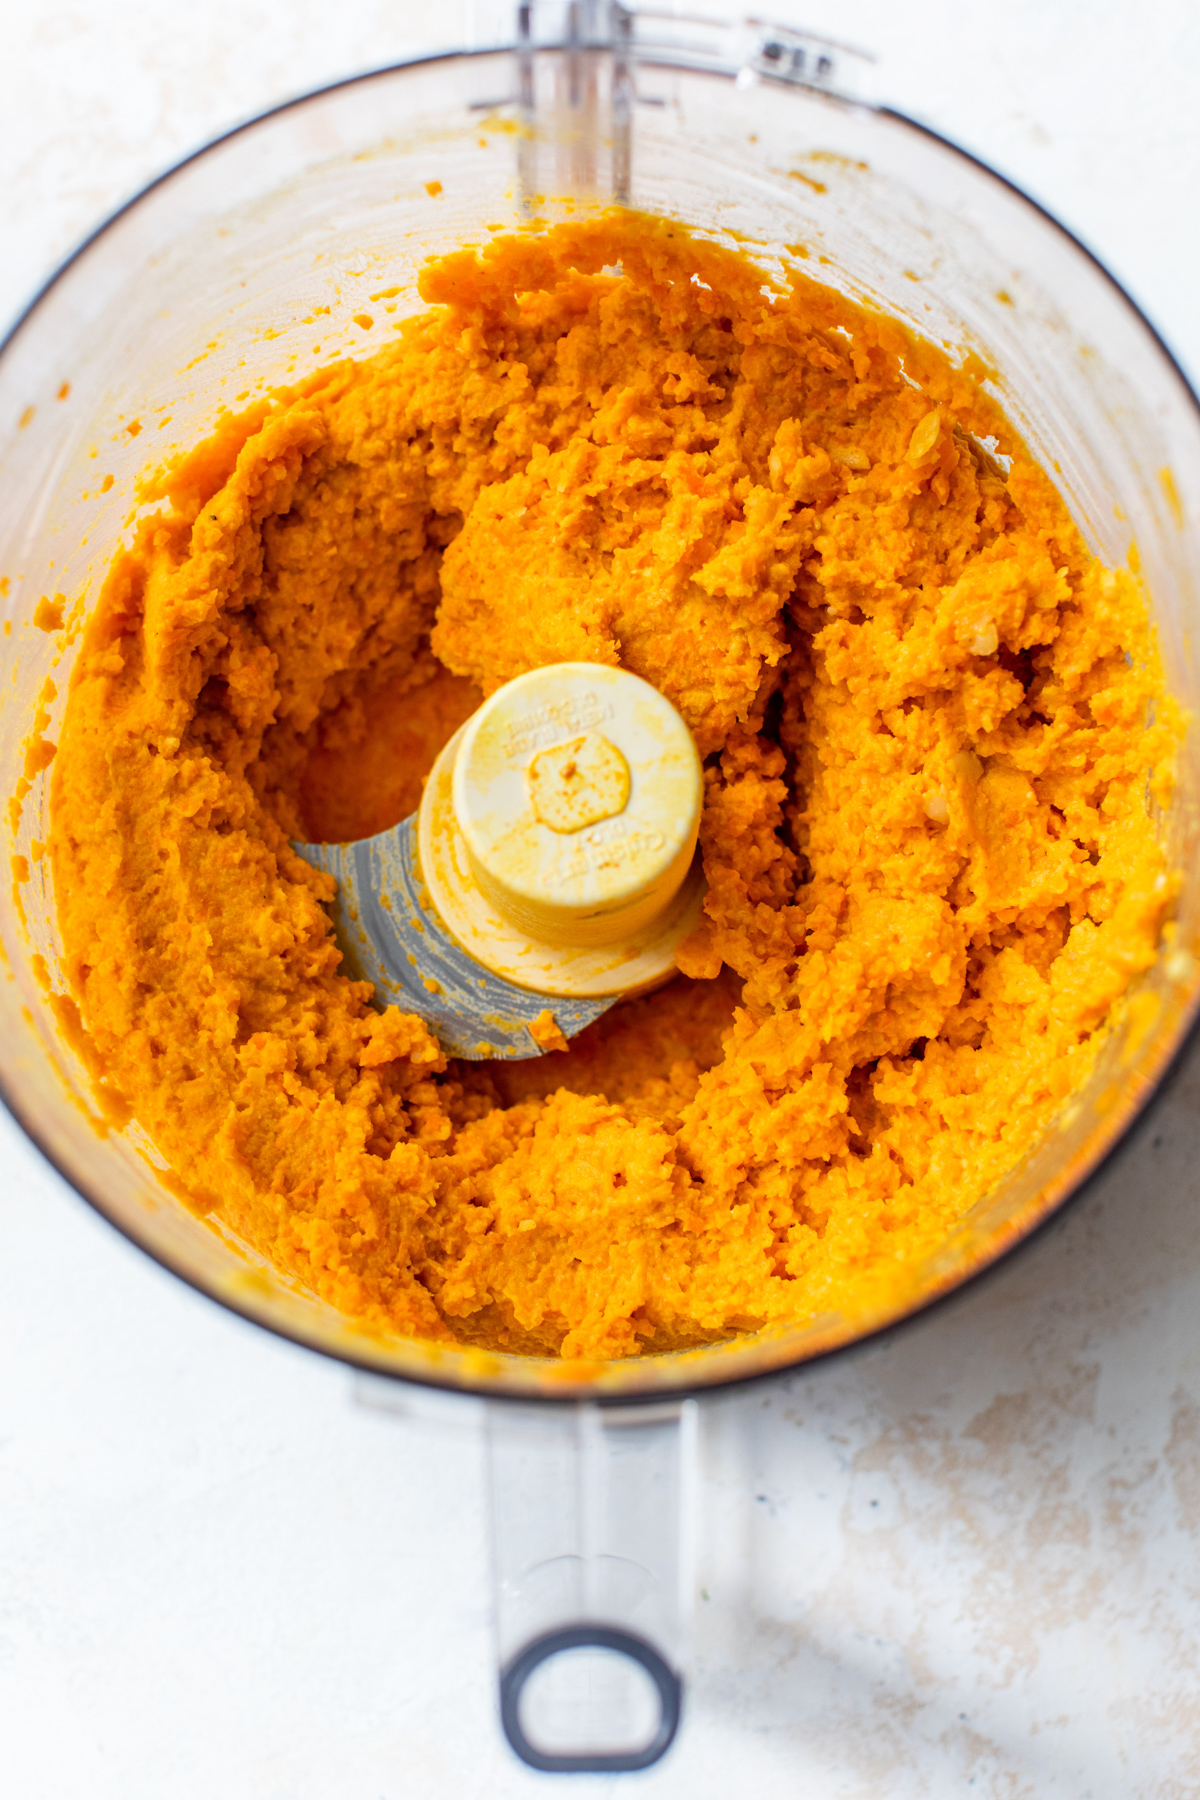 carrot hummus blended in a food processor